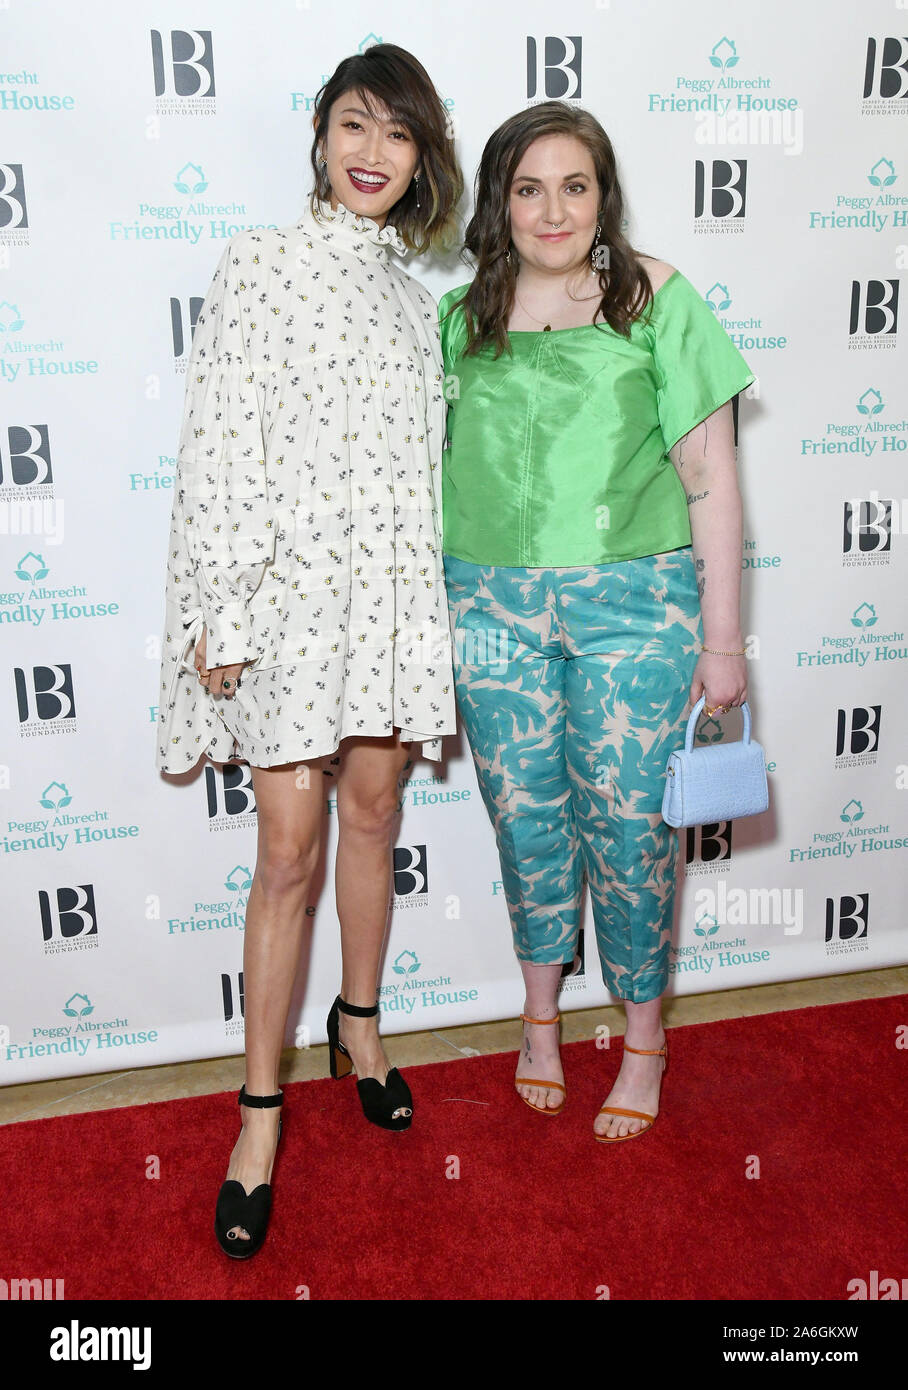 October 25, 2019, Beverly Hills, California, USA: 26 October 2019 -Beverly Hills, California - Yu Yamada, Lena Dunham. Friendly House 30th Annual Awards Luncheon held at the Beverly Hilton Hotel. Photo Credit: Birdie Thompson/AdMedia (Credit Image: © Birdie Thompson/AdMedia via ZUMA Wire) Stock Photo